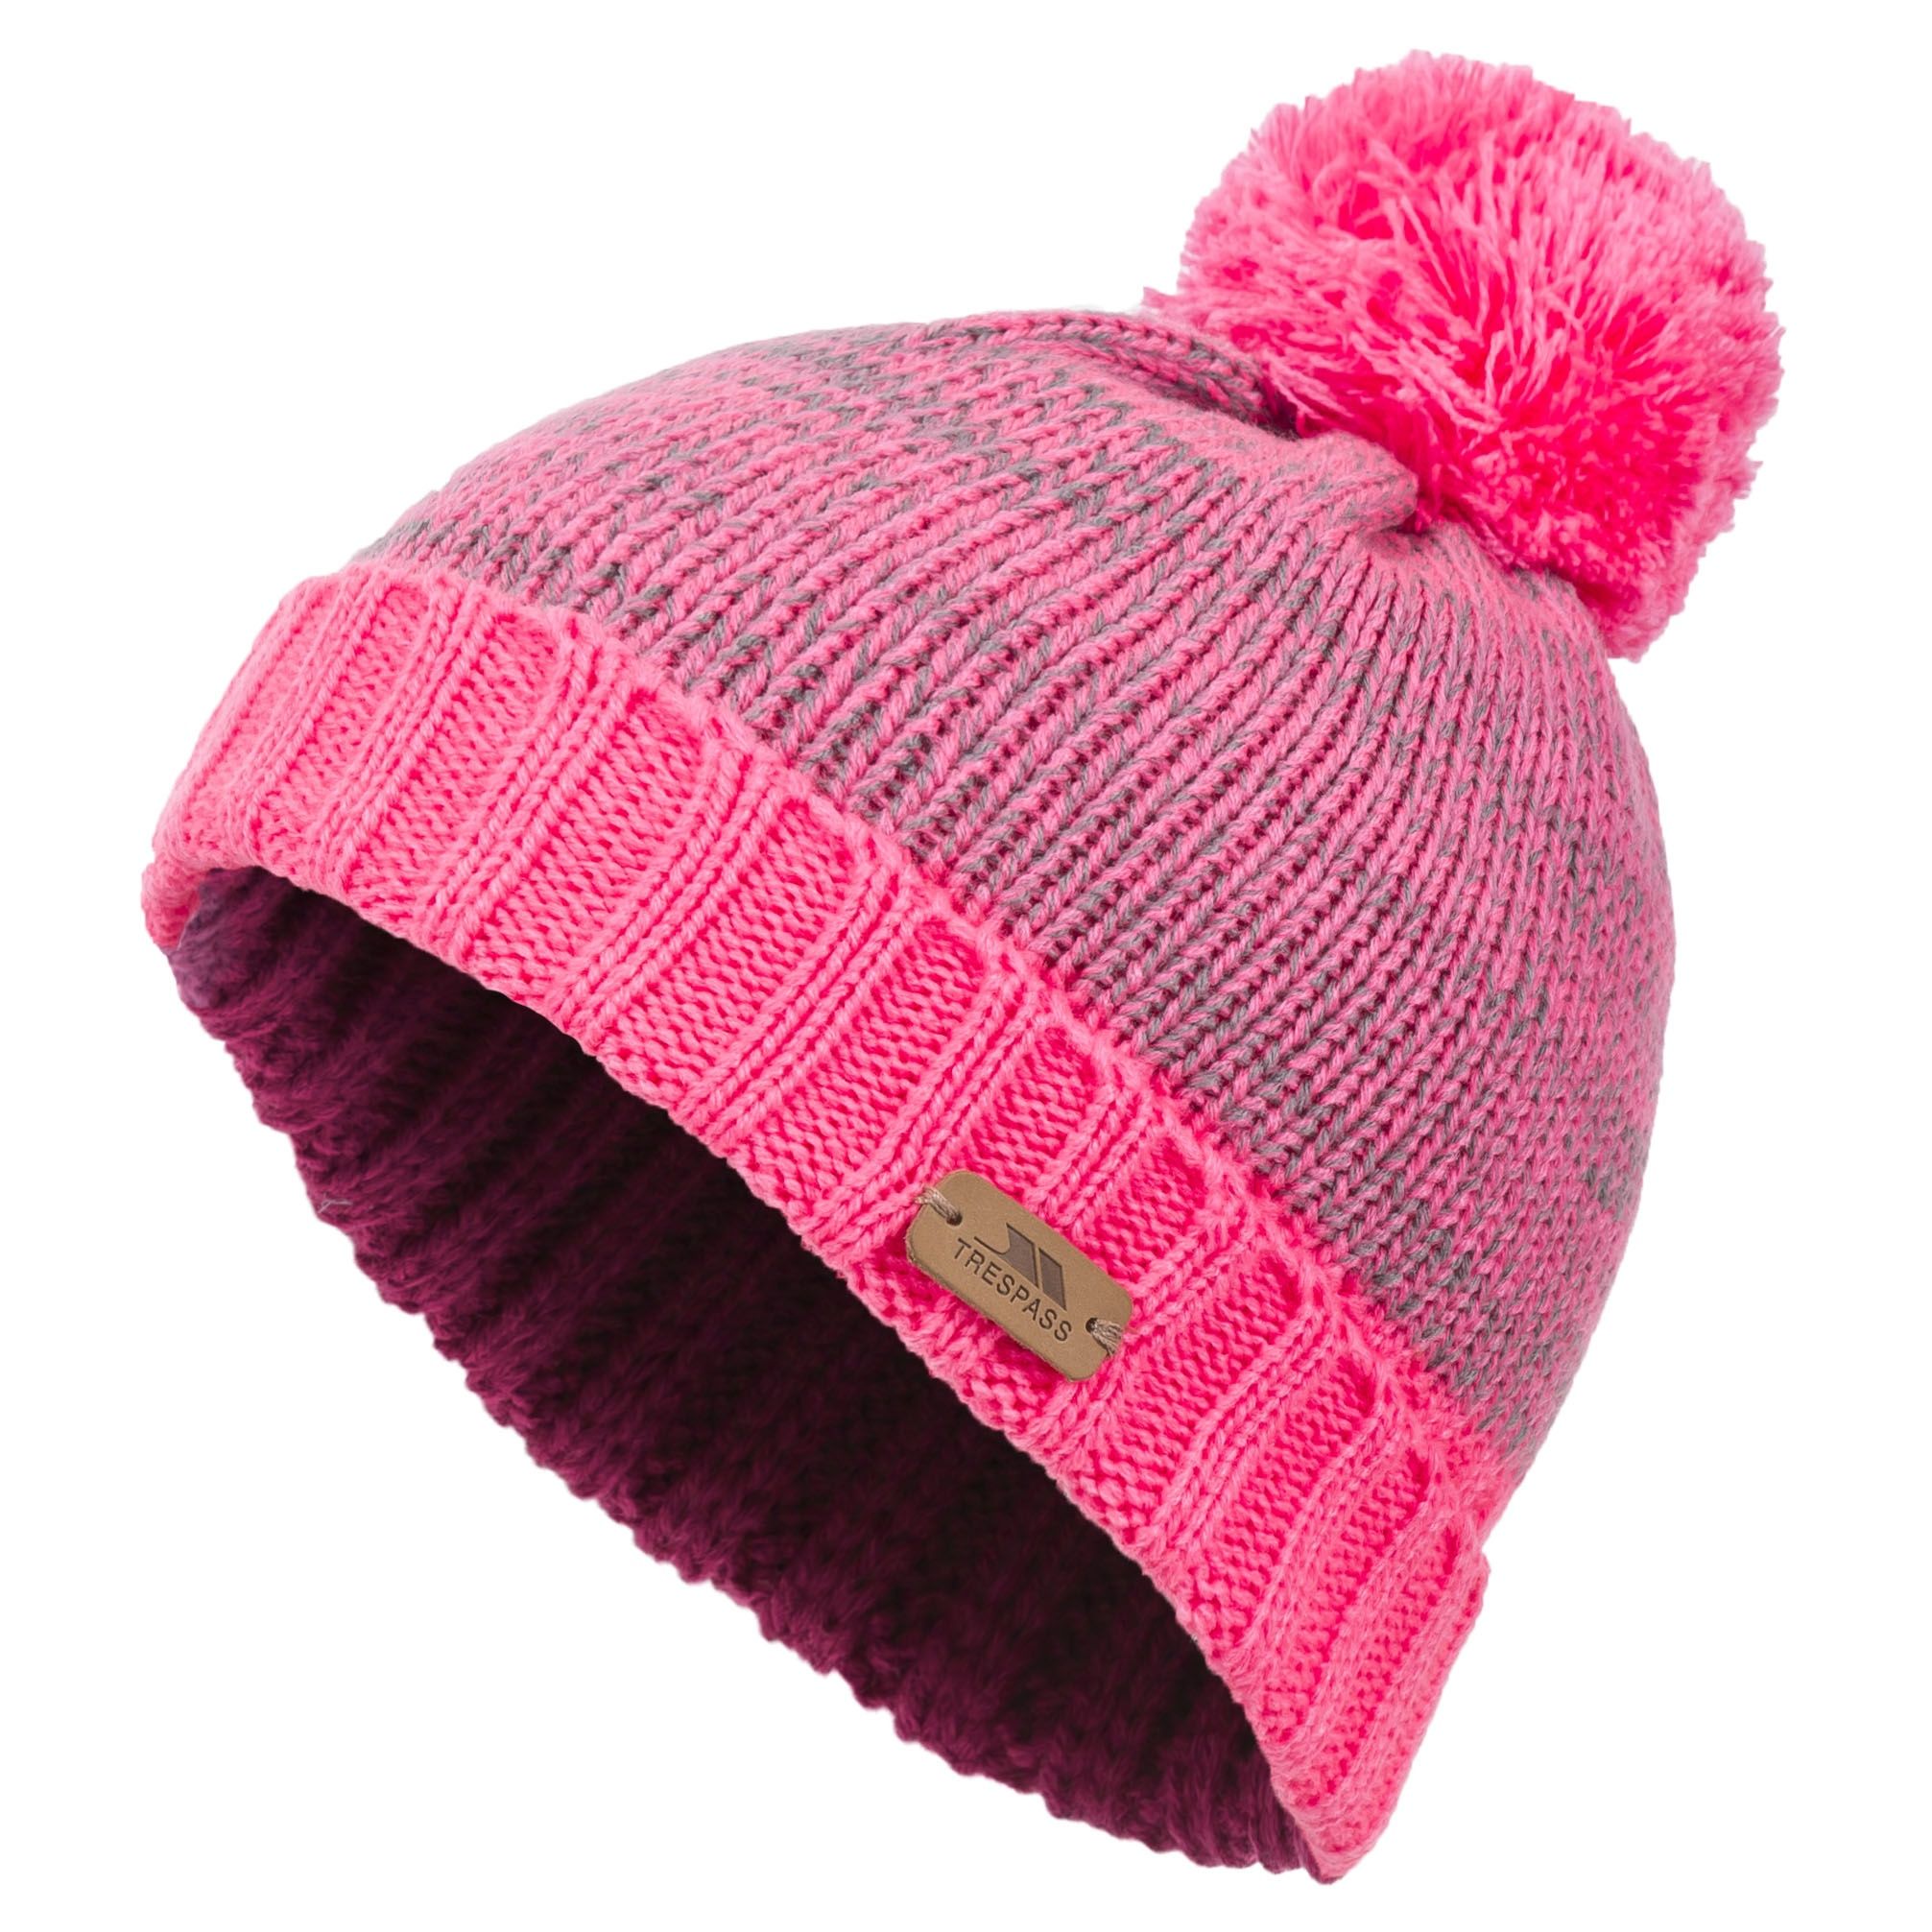 Knitted hat with pom pom. Leatherette badge. Fleece lined. Outer: 100% Acrylic, Lining: 100% Polyester Anti pil fleece.